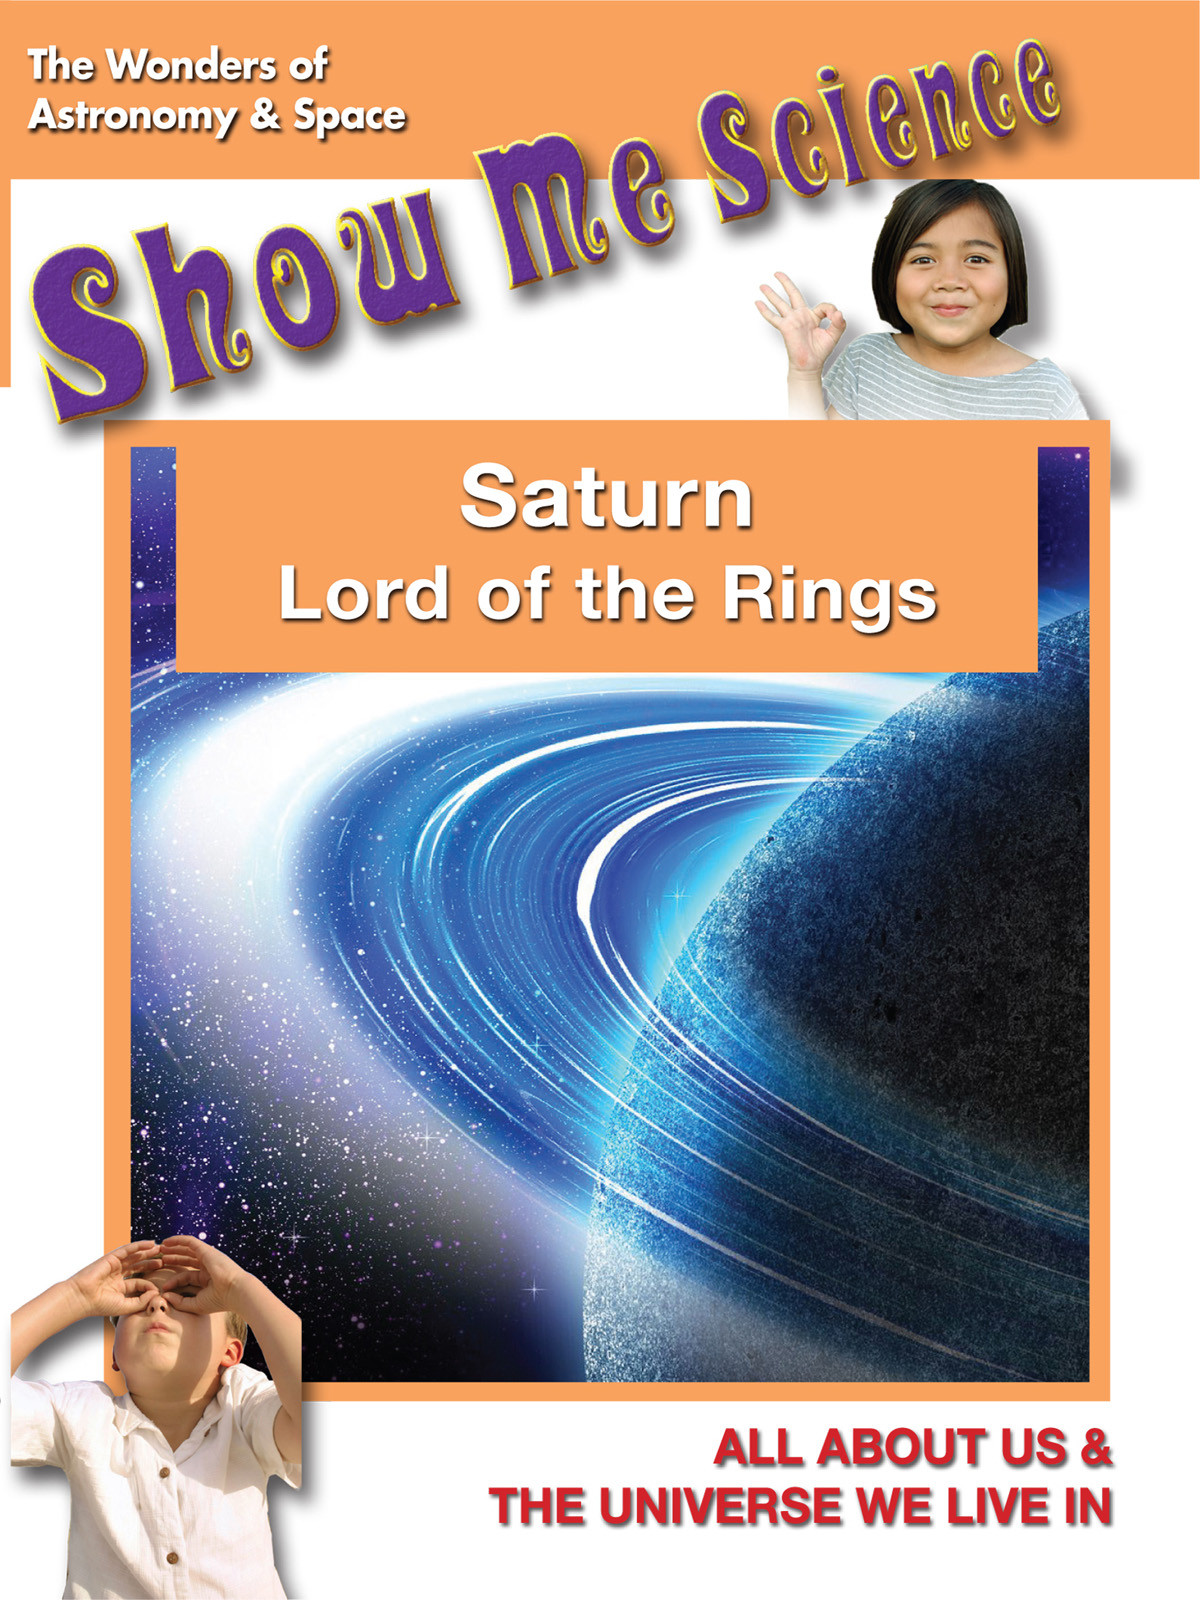 K4642 - Saturn Lord of the Rings